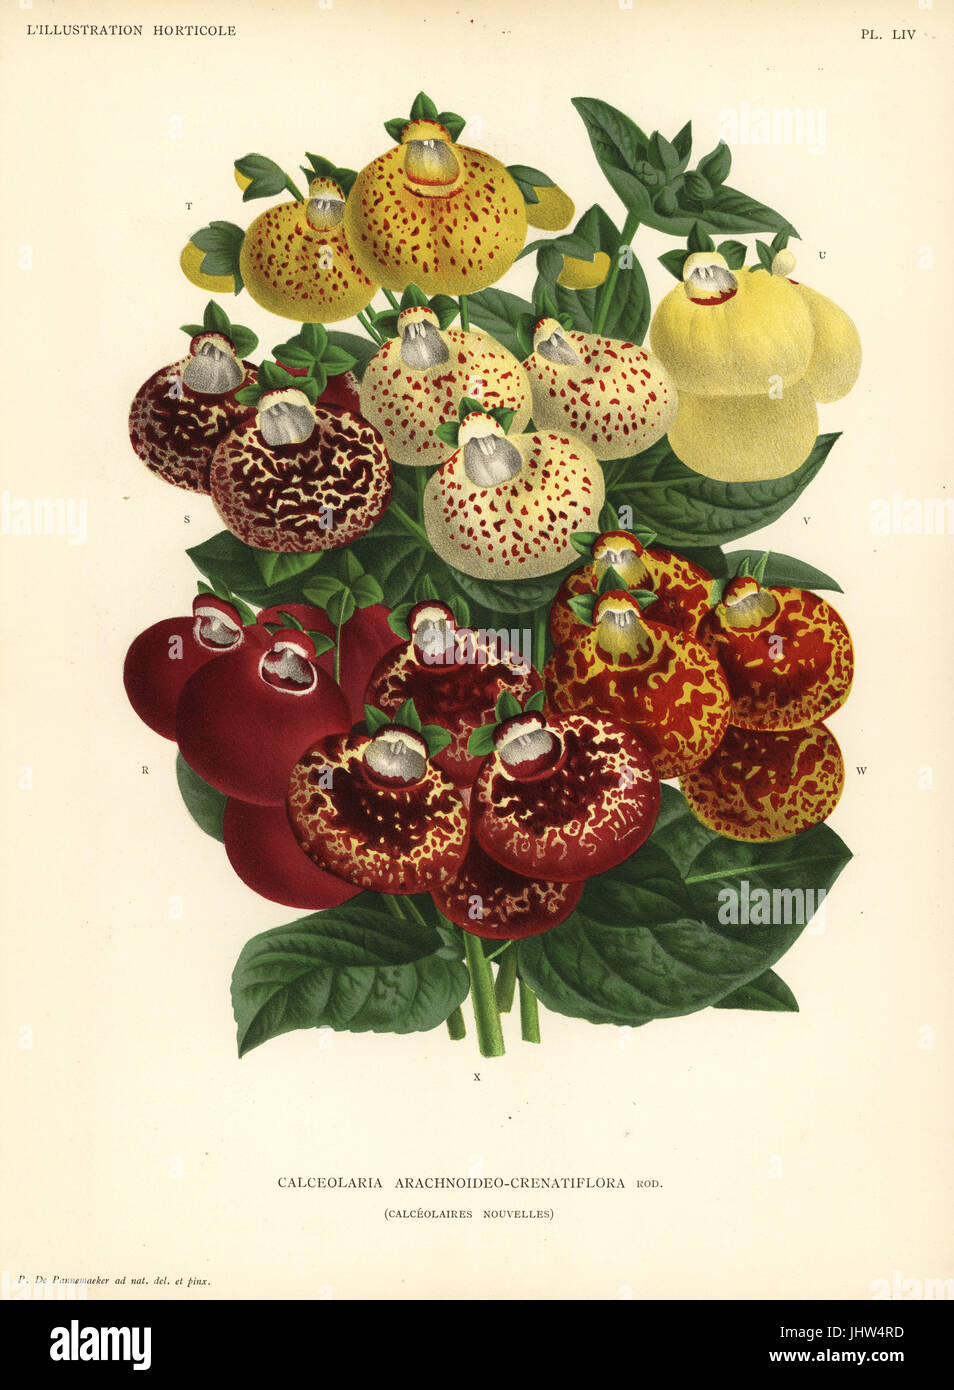 Lady's purse varieties, Calceolaria arachnoidea (Calceolaria arachnoideo-crenatiflora). Drawn and chromolithographed by Pieter de Pannemaeker from Jean Linden's l'Illustration Horticole, Brussels, 1888. Stock Photo